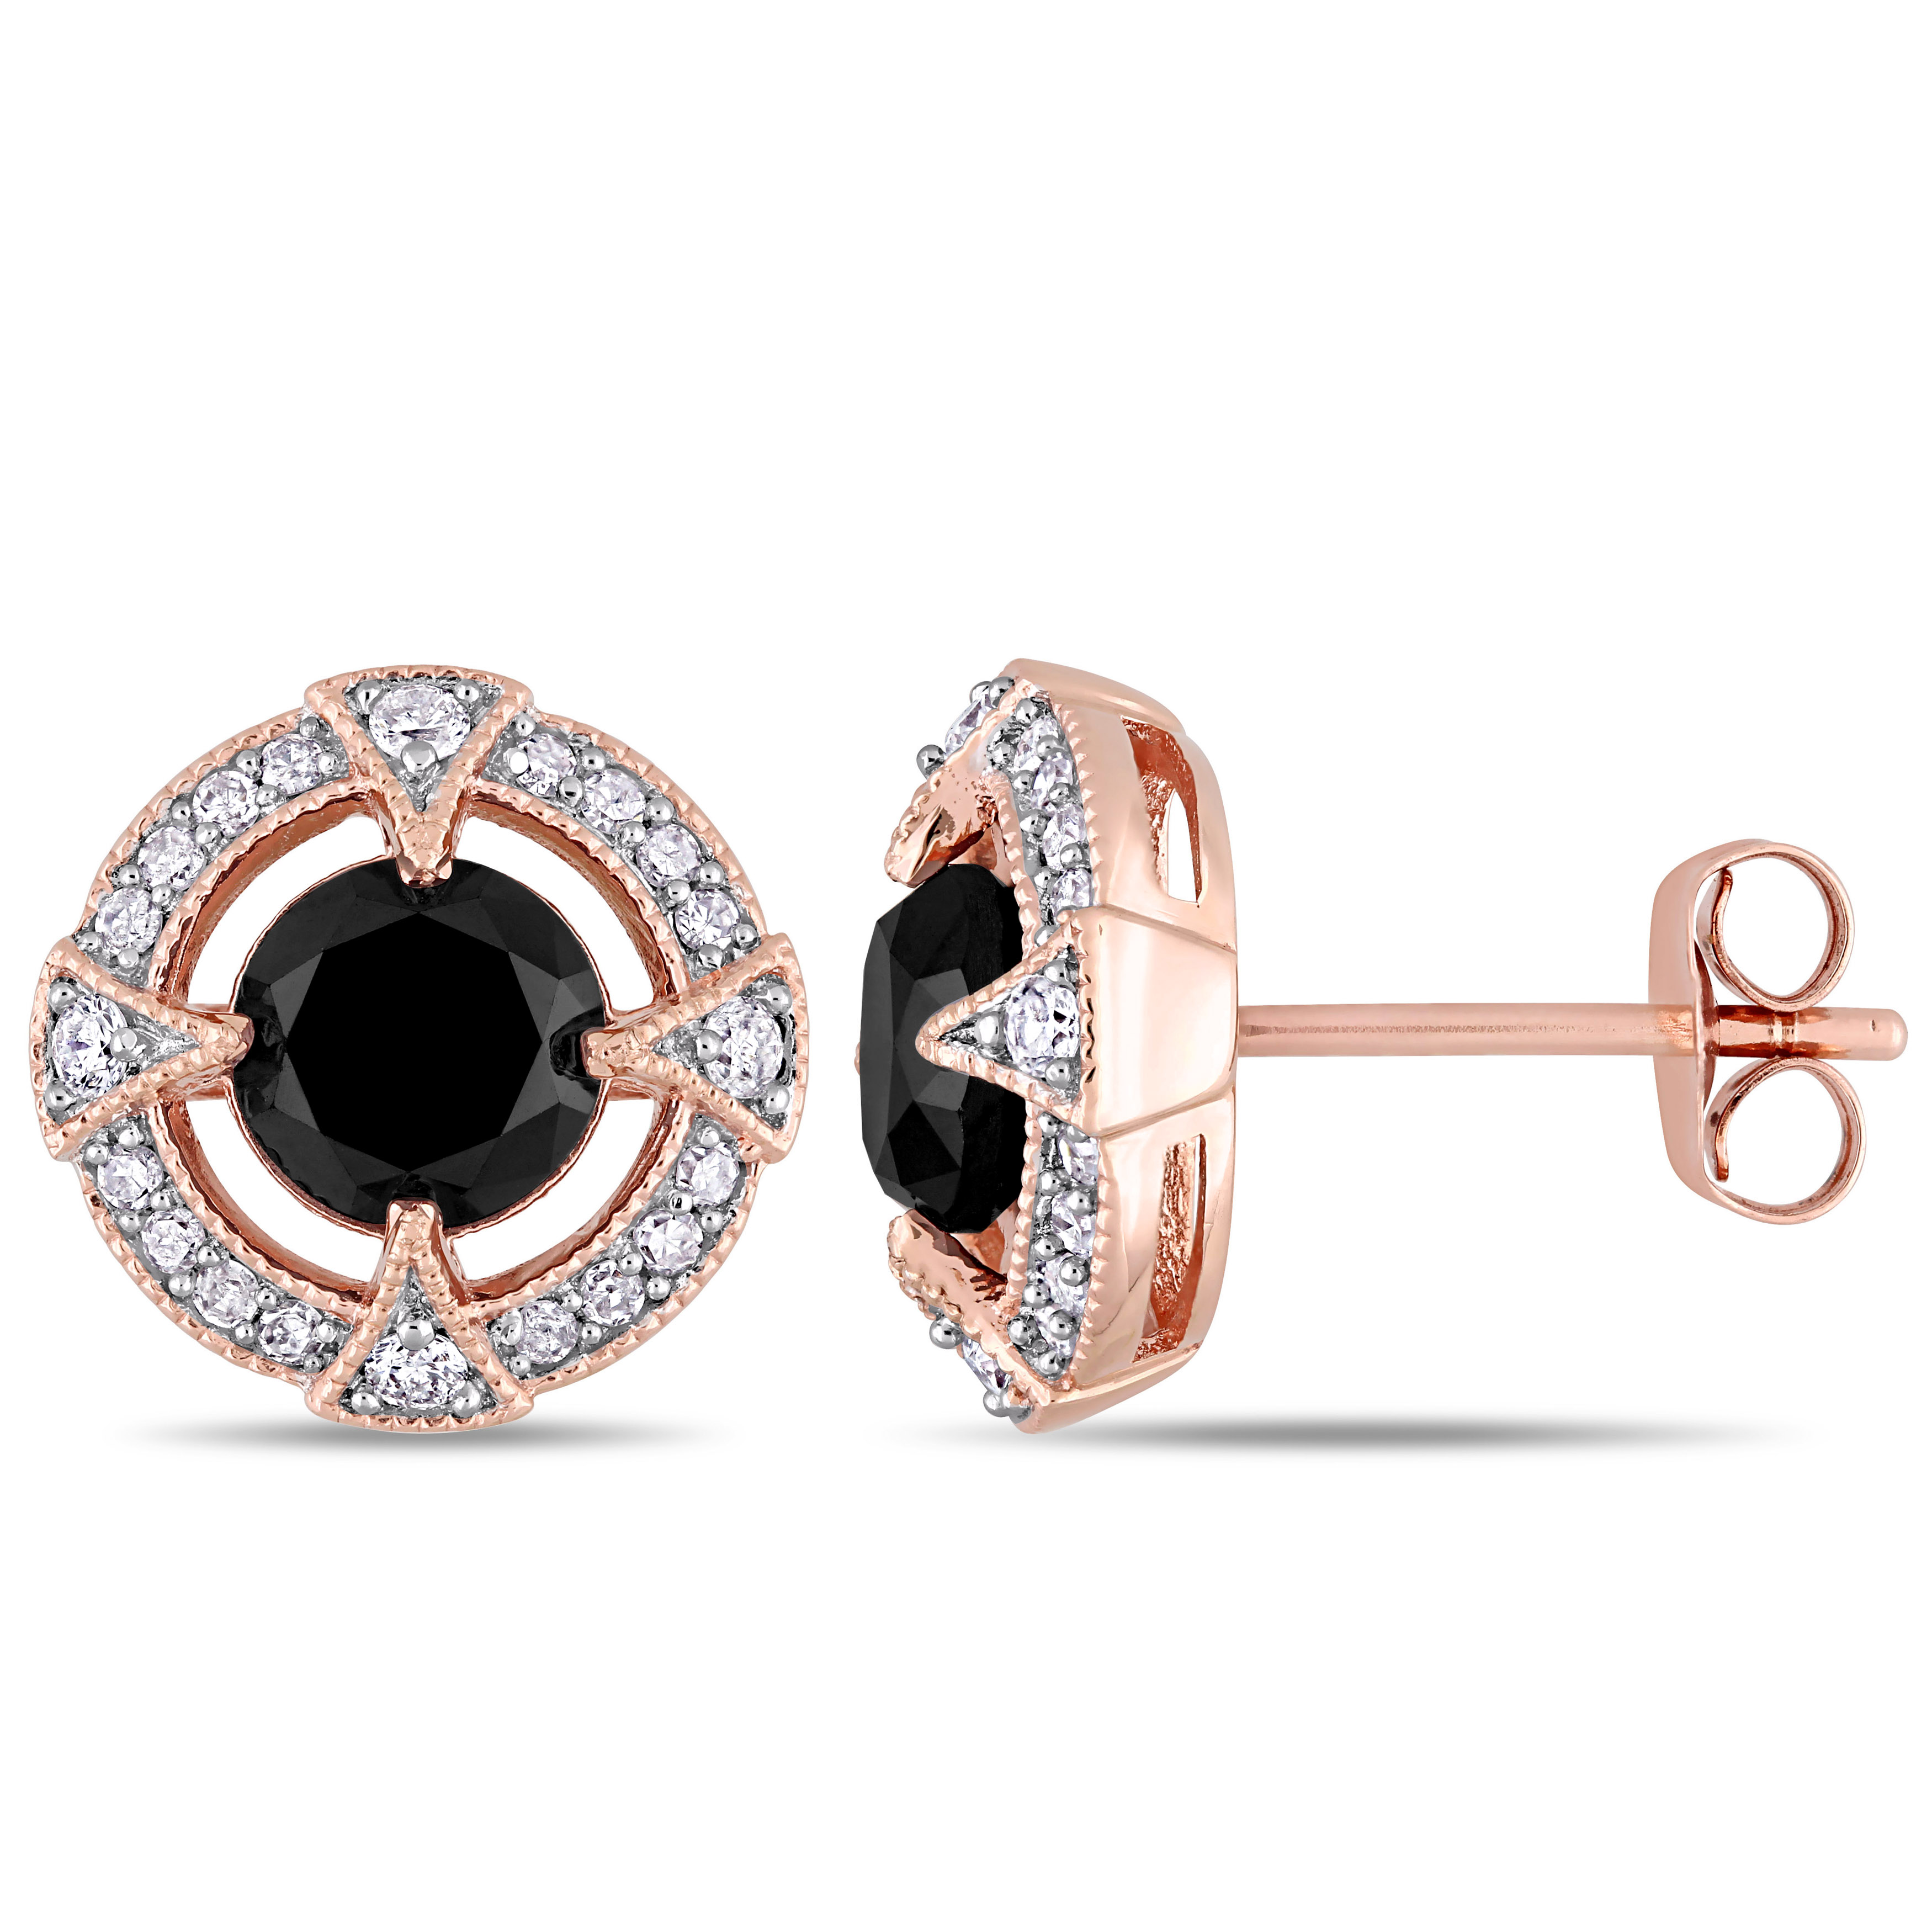 2 1/5 CT TW Black and White Diamond Halo Stud Earrings in 10k Rose Gold